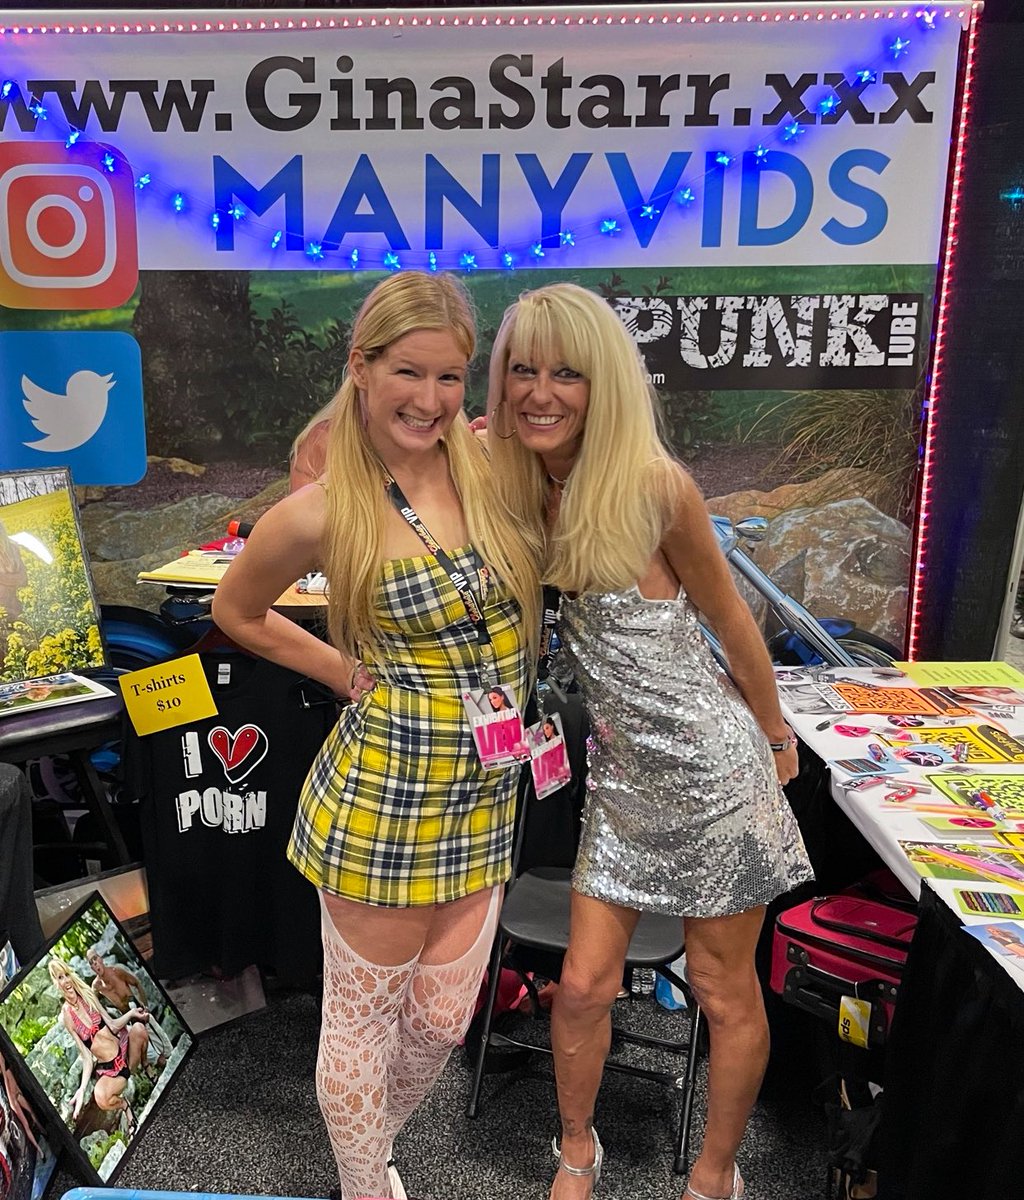 I miss doing @EXXXOTICA :( if anyone needs a convention babe for future expos, I’ll represent your brand like it’s my own 🥹 @GinaStarr69 and I had an absolute blast in 2021 🔥